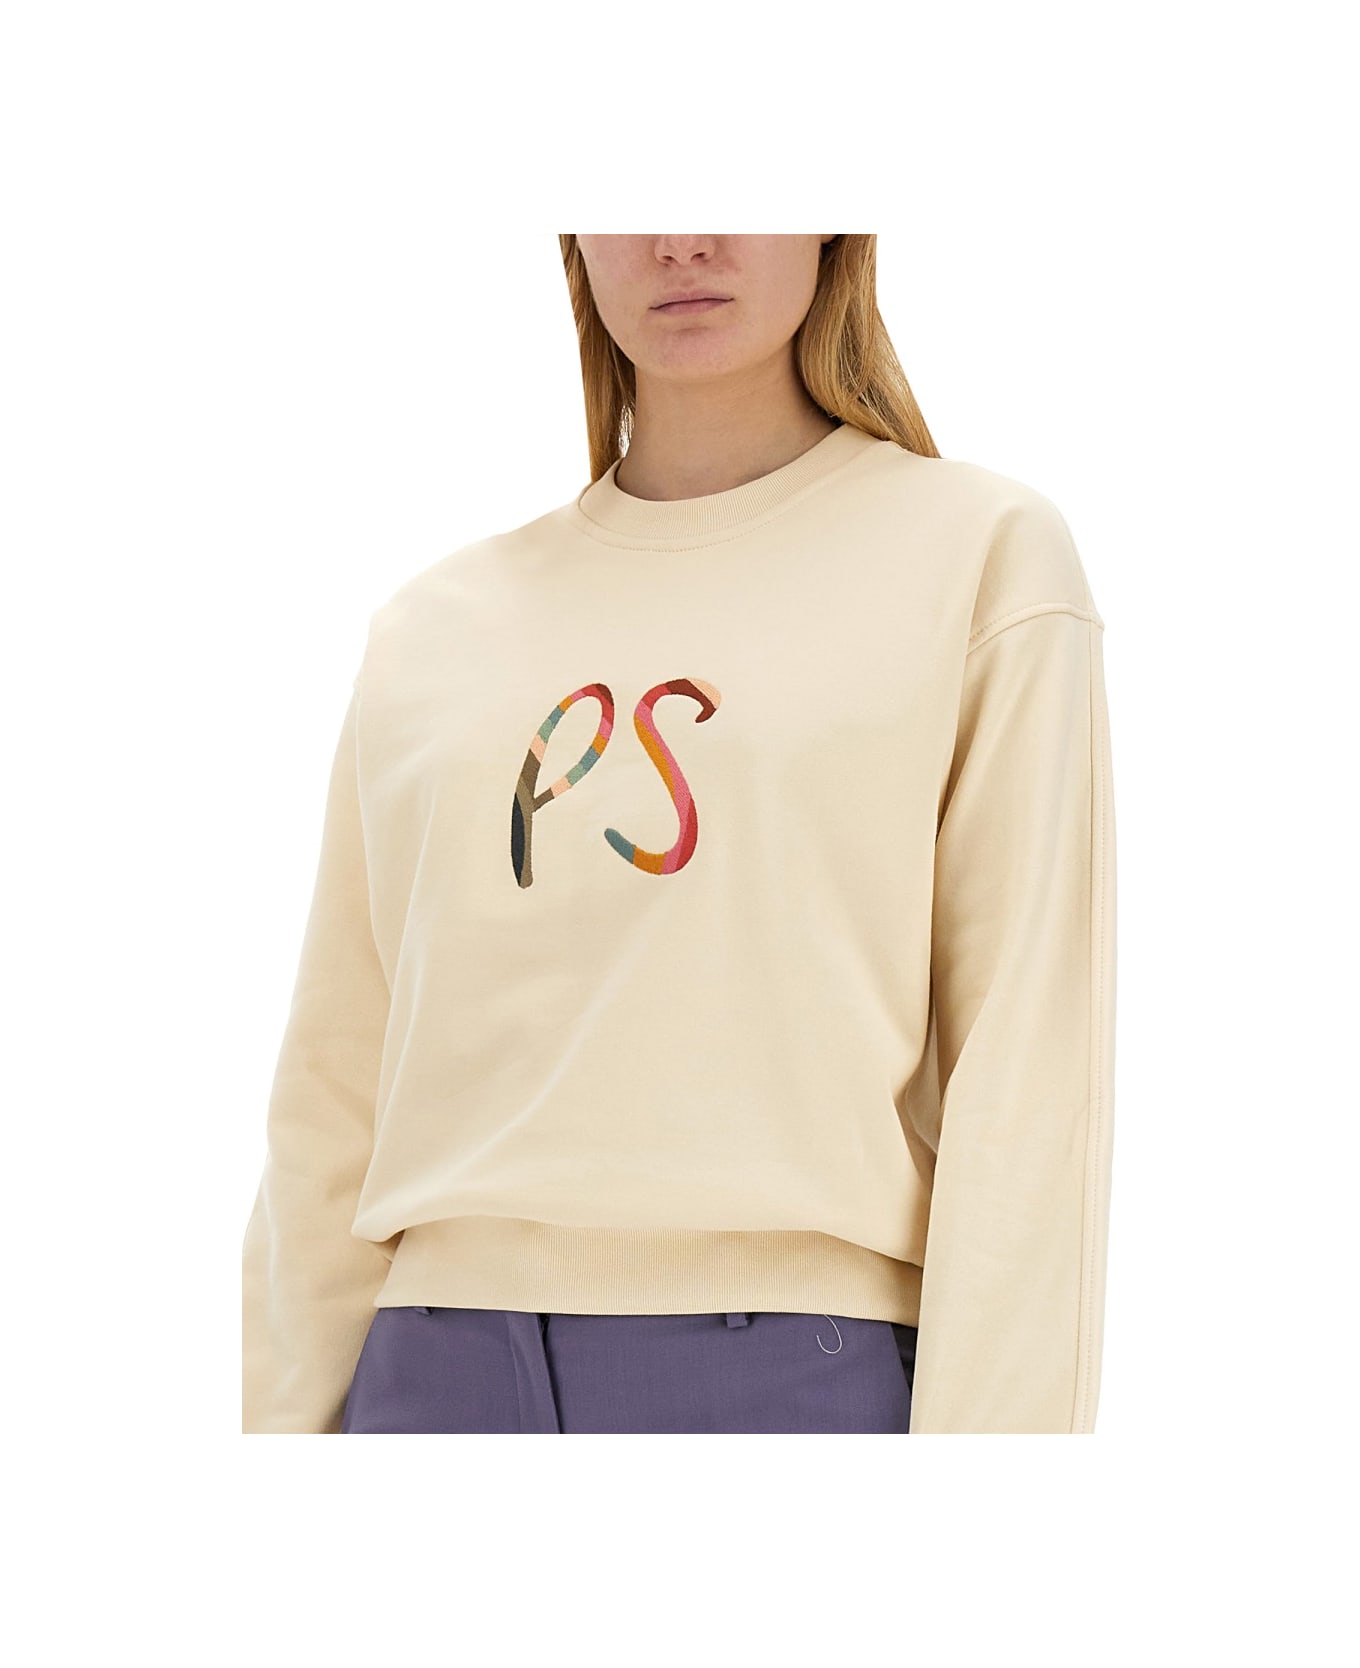 PS by Paul Smith Sweatshirt With Logo - NUDE